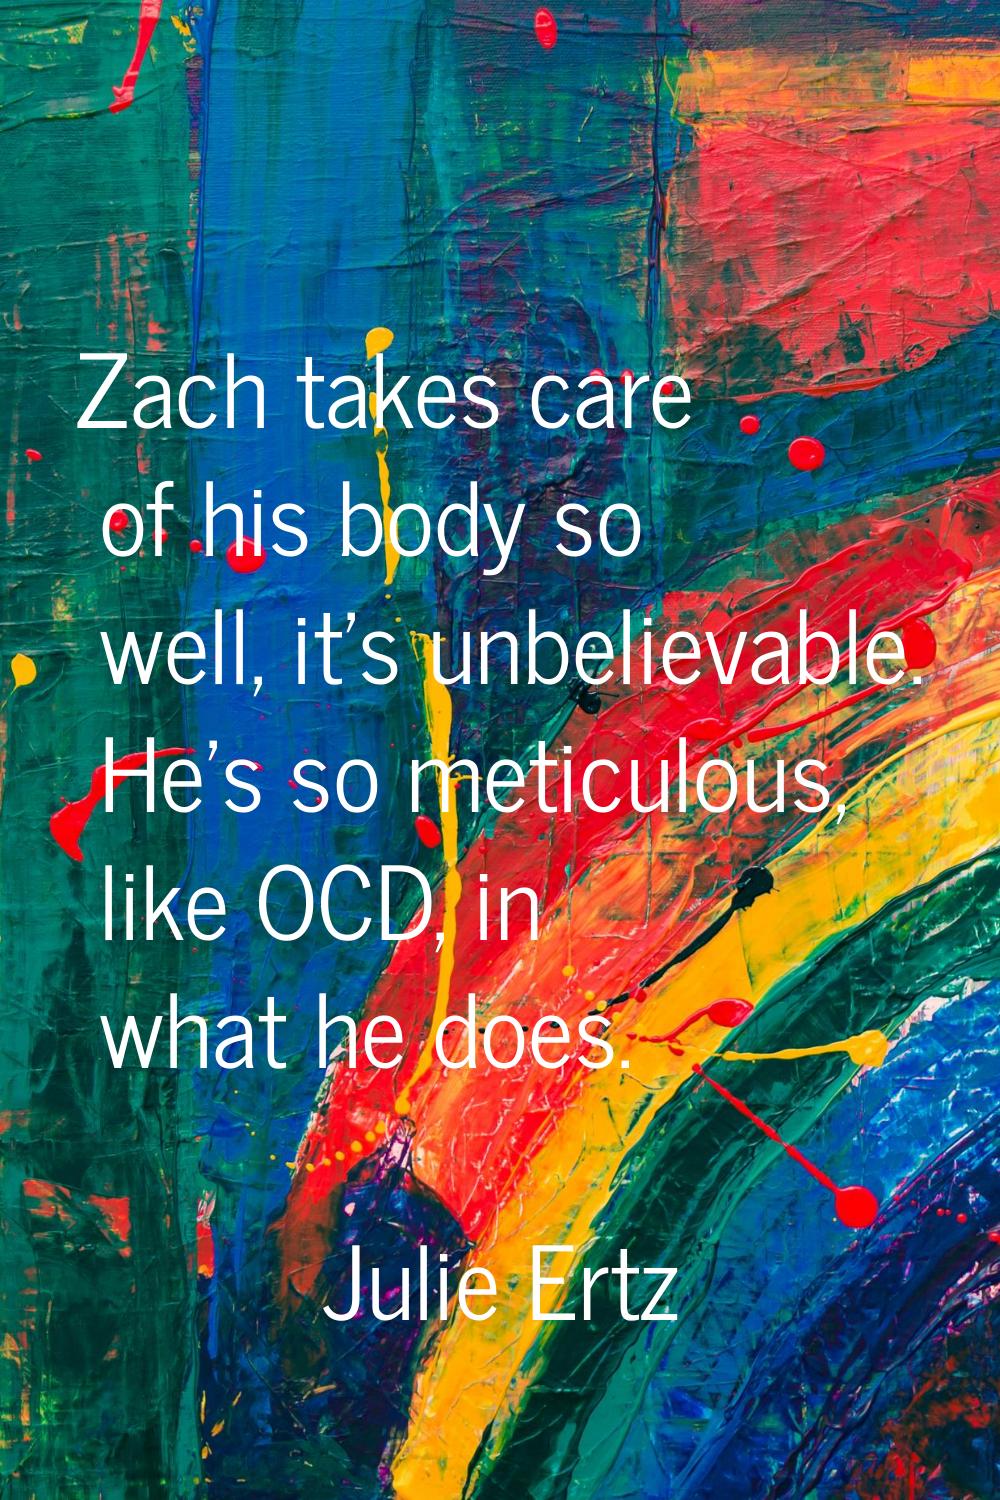 Zach takes care of his body so well, it's unbelievable. He's so meticulous, like OCD, in what he do